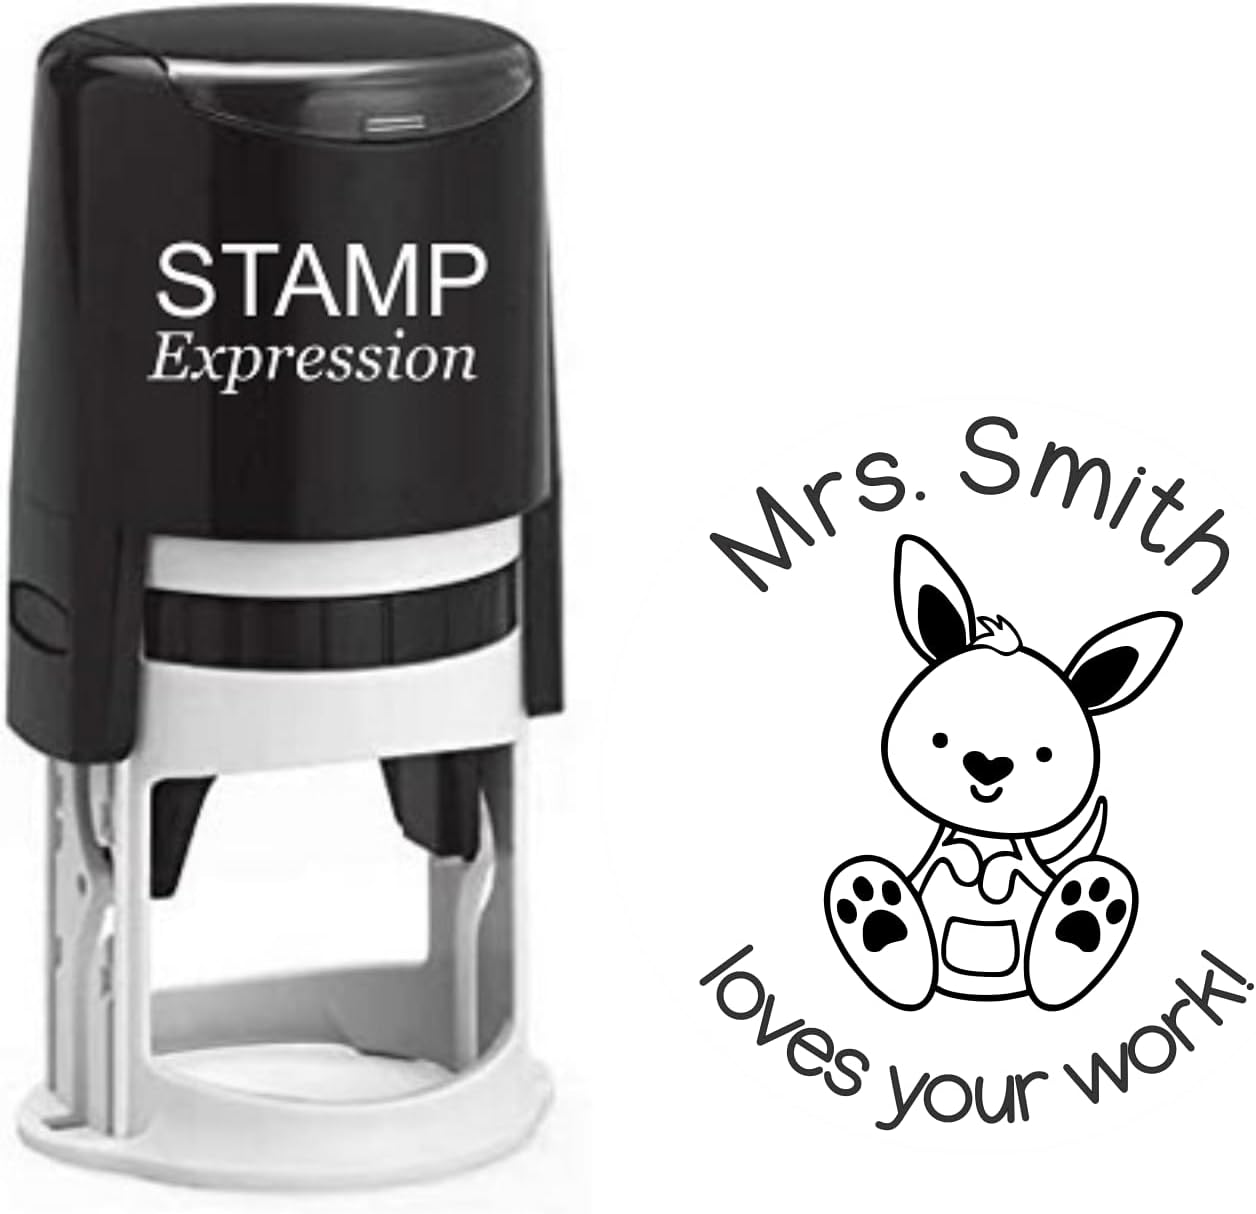 Loves Your Work Baby Kangaroo Teacher Custom Stamp - Self Inking. Personalized Rubber Stamp with Lines of Text (SH-76210)